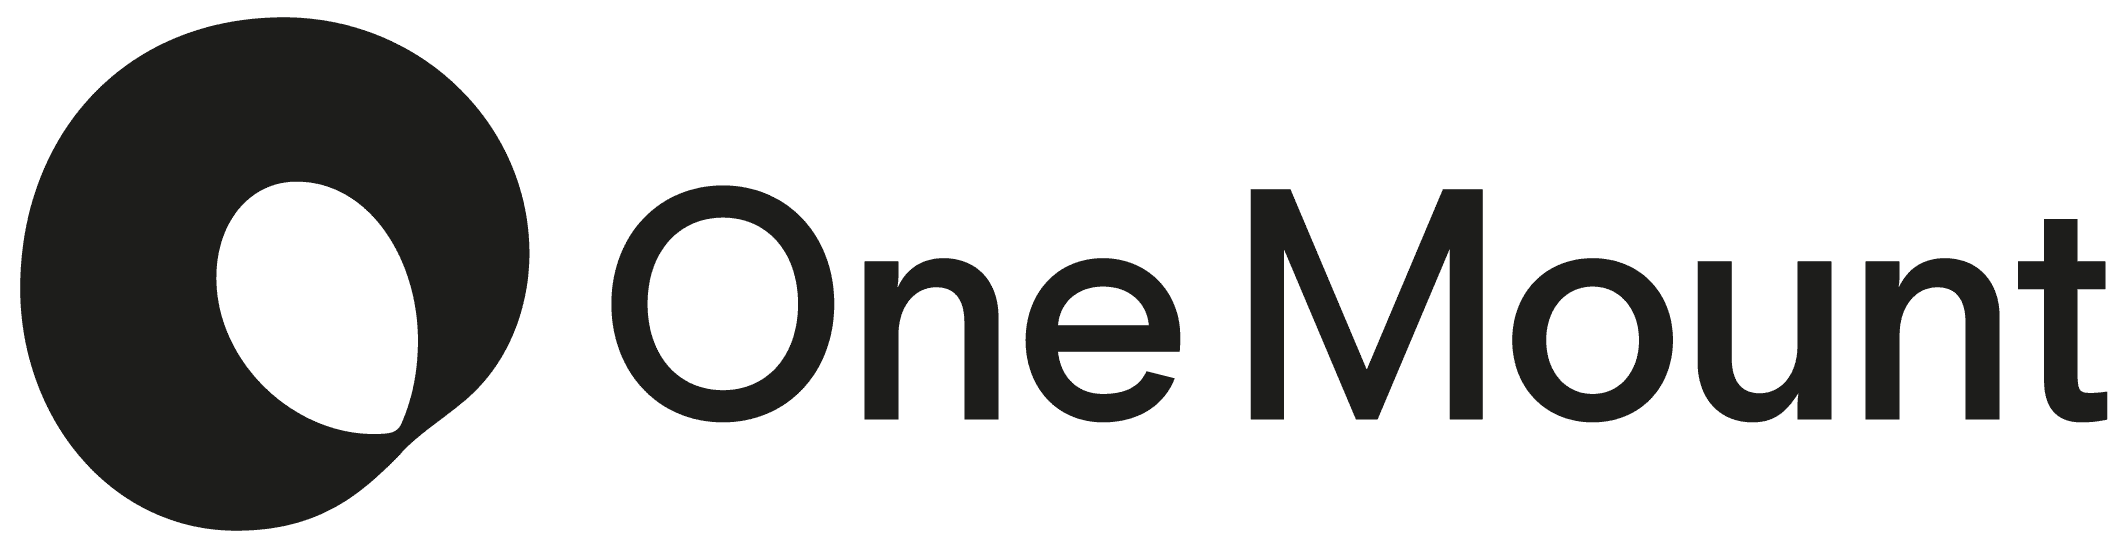 One Mount Group Tuyển Dụng Digital Marketing Collaborator Full-time